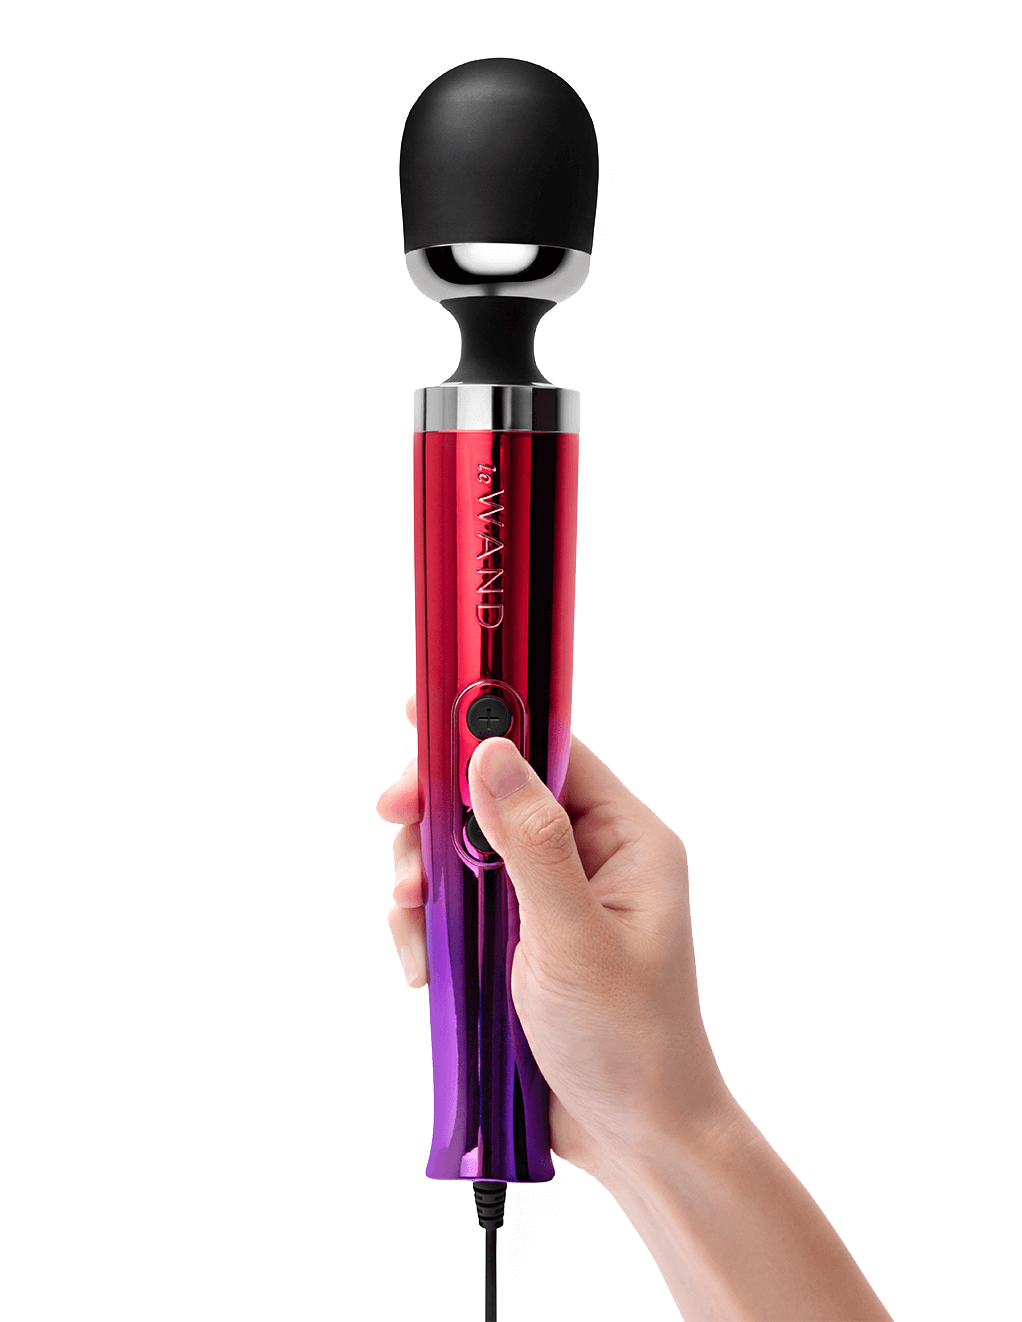 Le Wand Diecast Plug-In Vibrating Wand - Ombre - In Hand